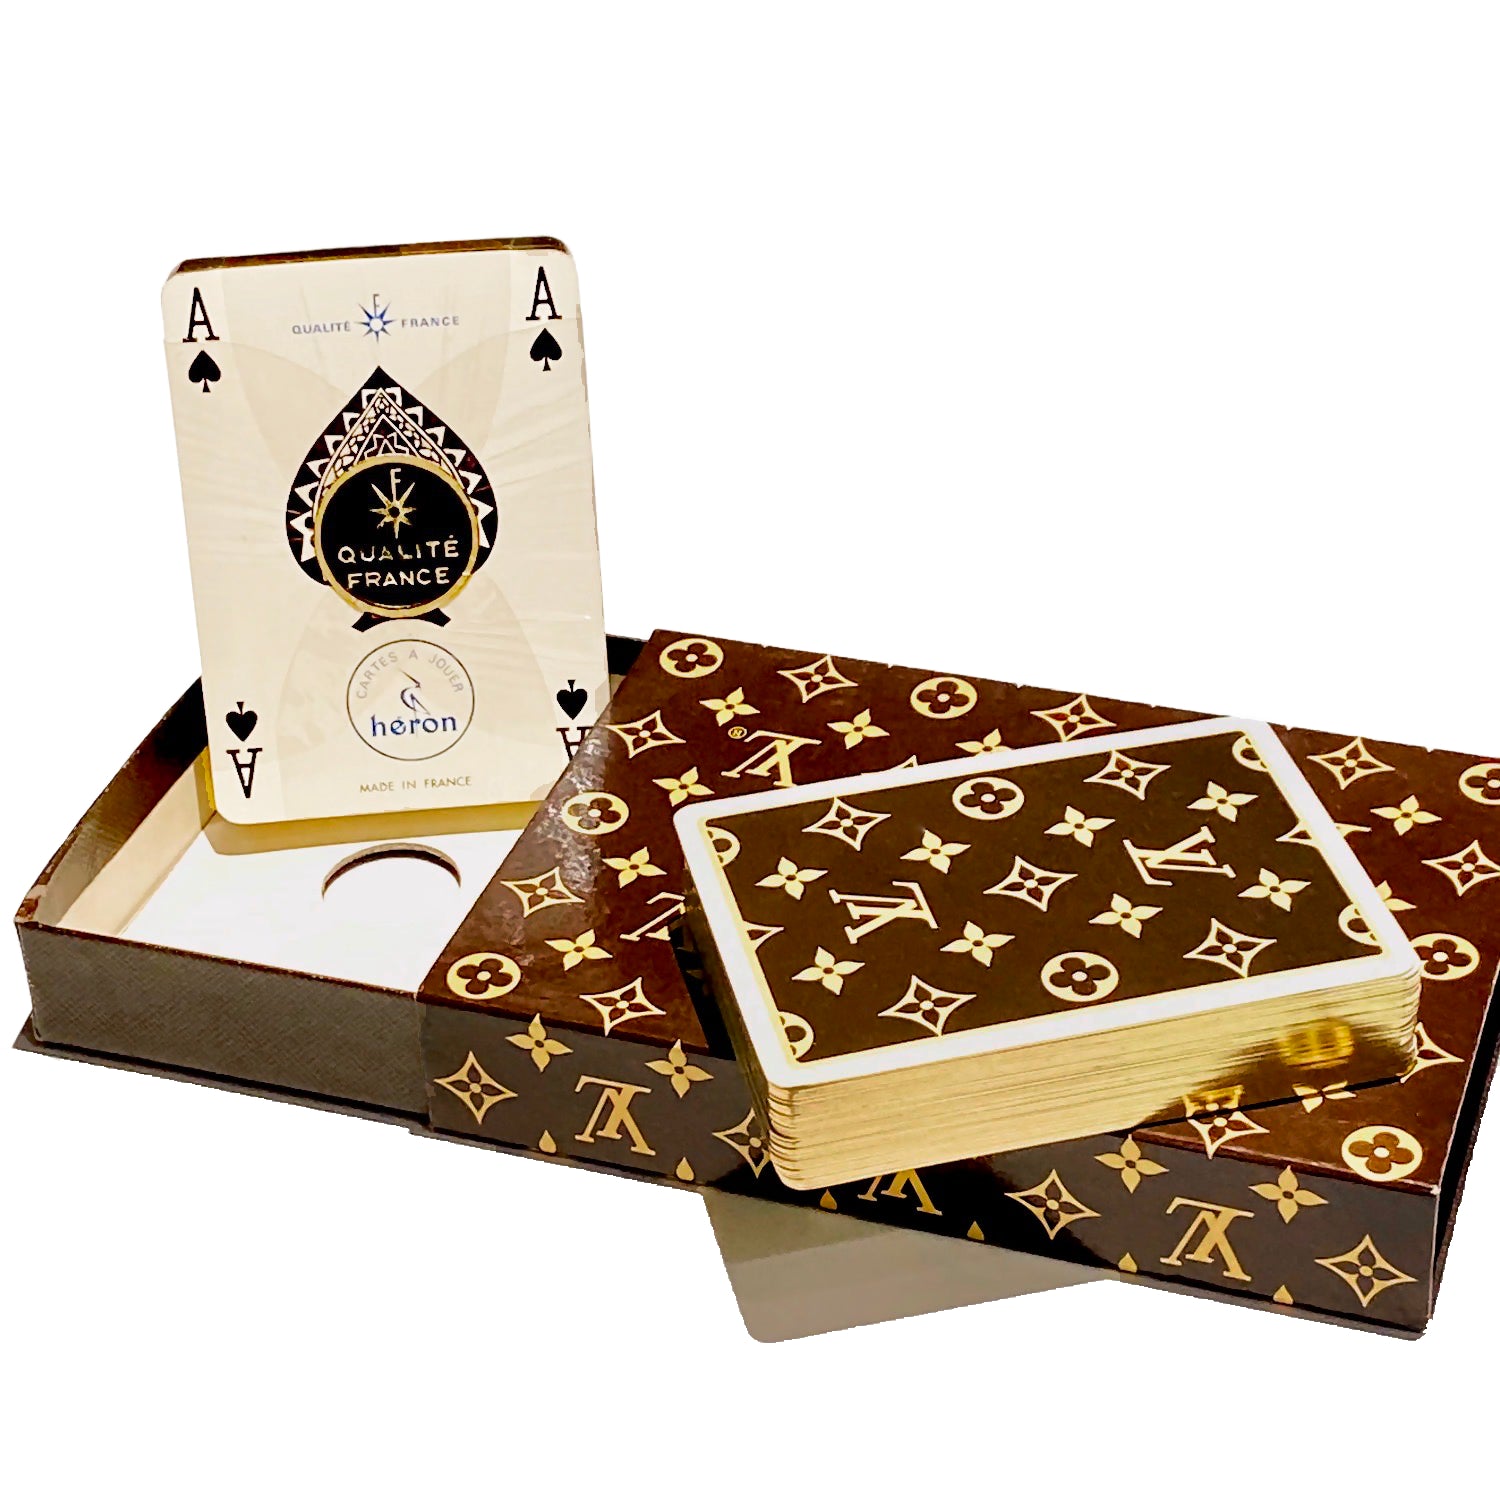 Sold at Auction: Louis Vuitton, Louis Vuitton Monogram Playing Cards In Box